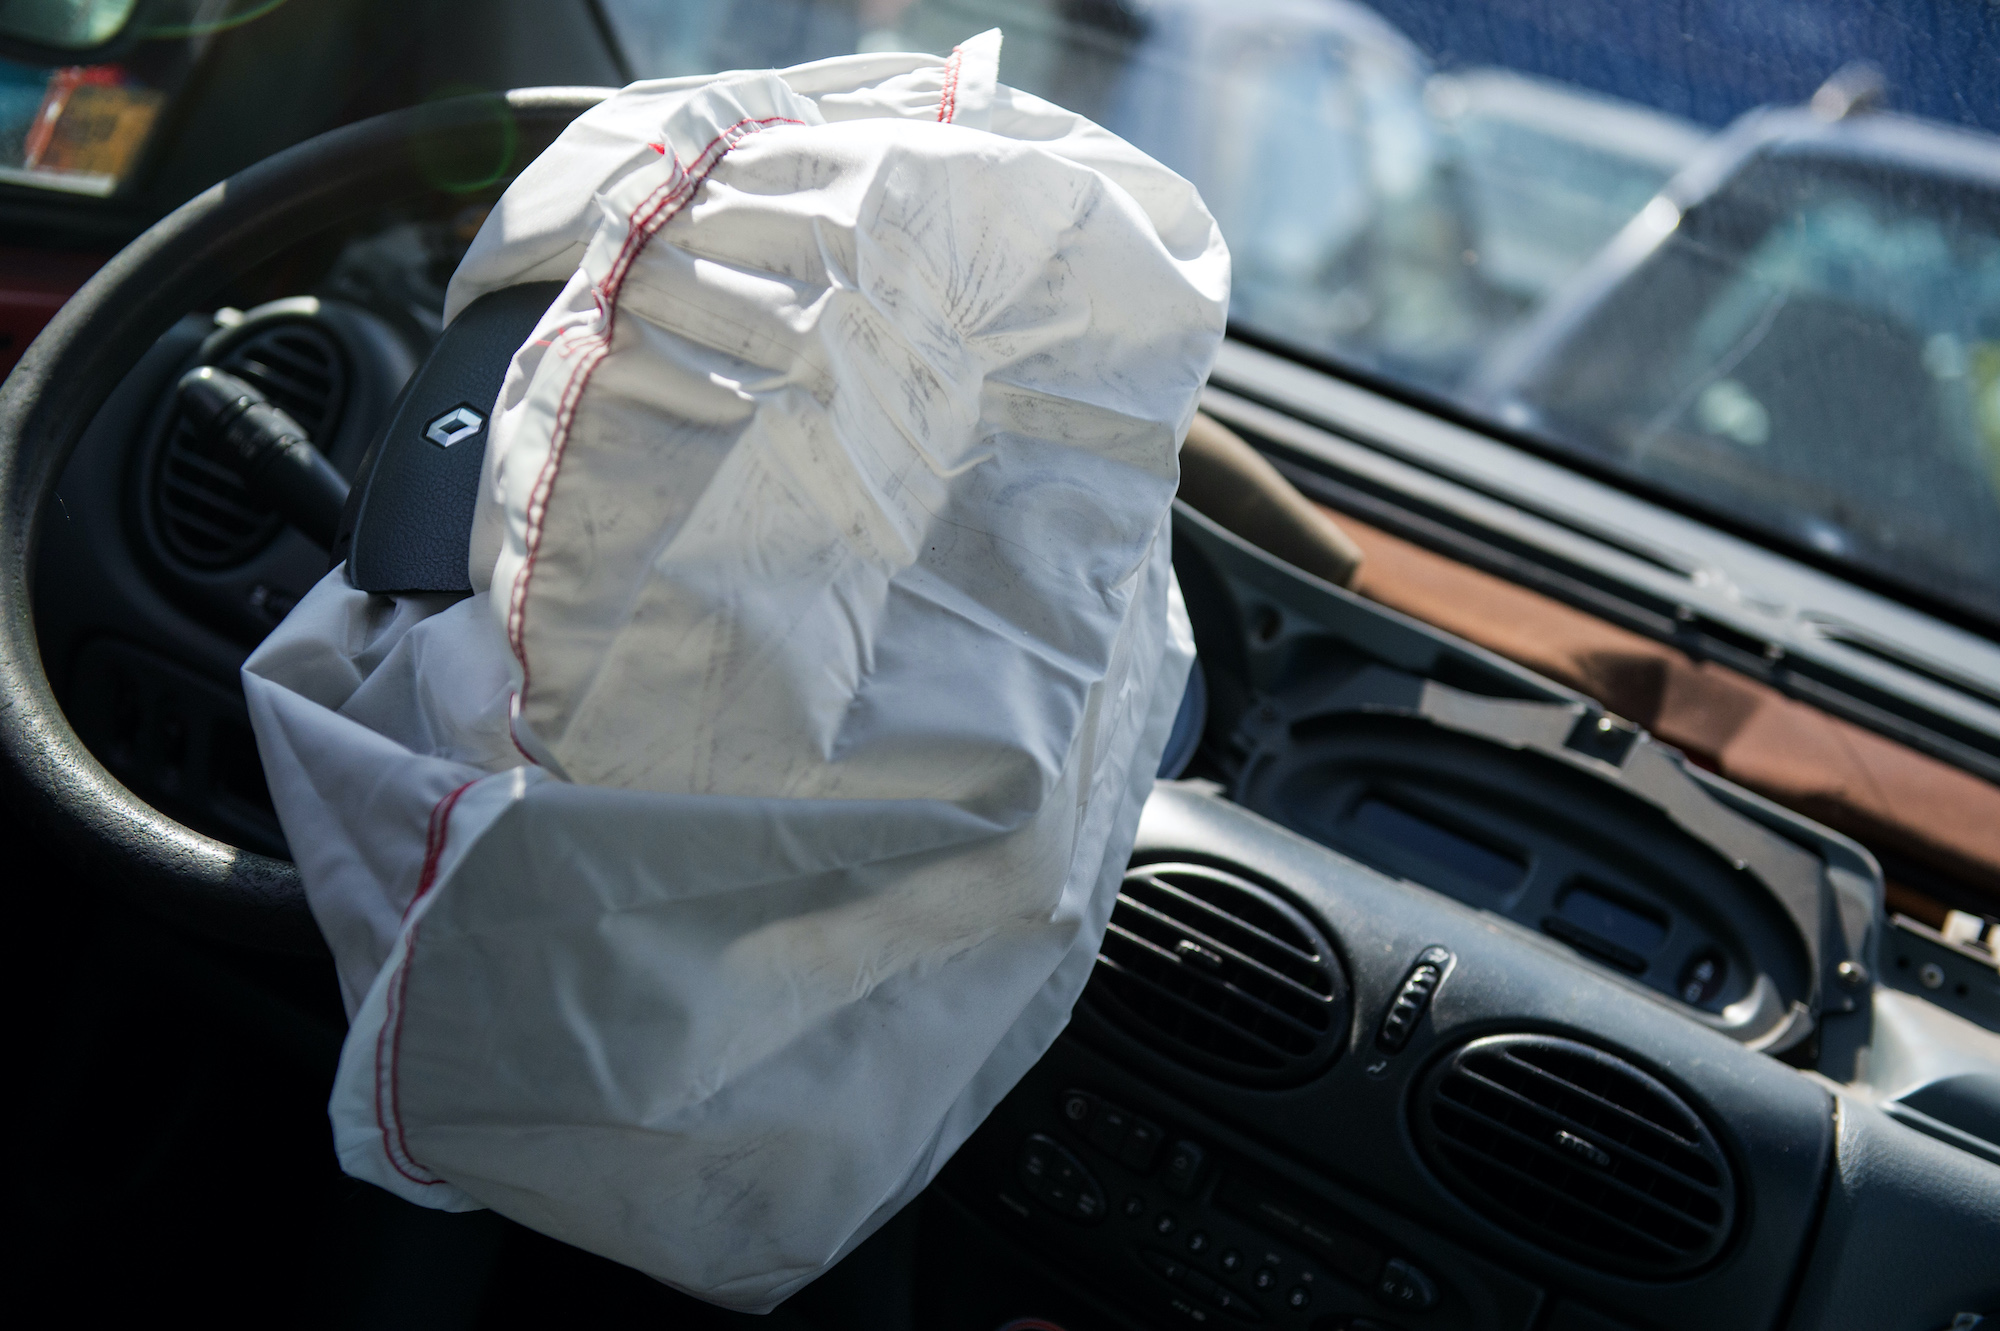 An airbag of a Renault car that was triggered